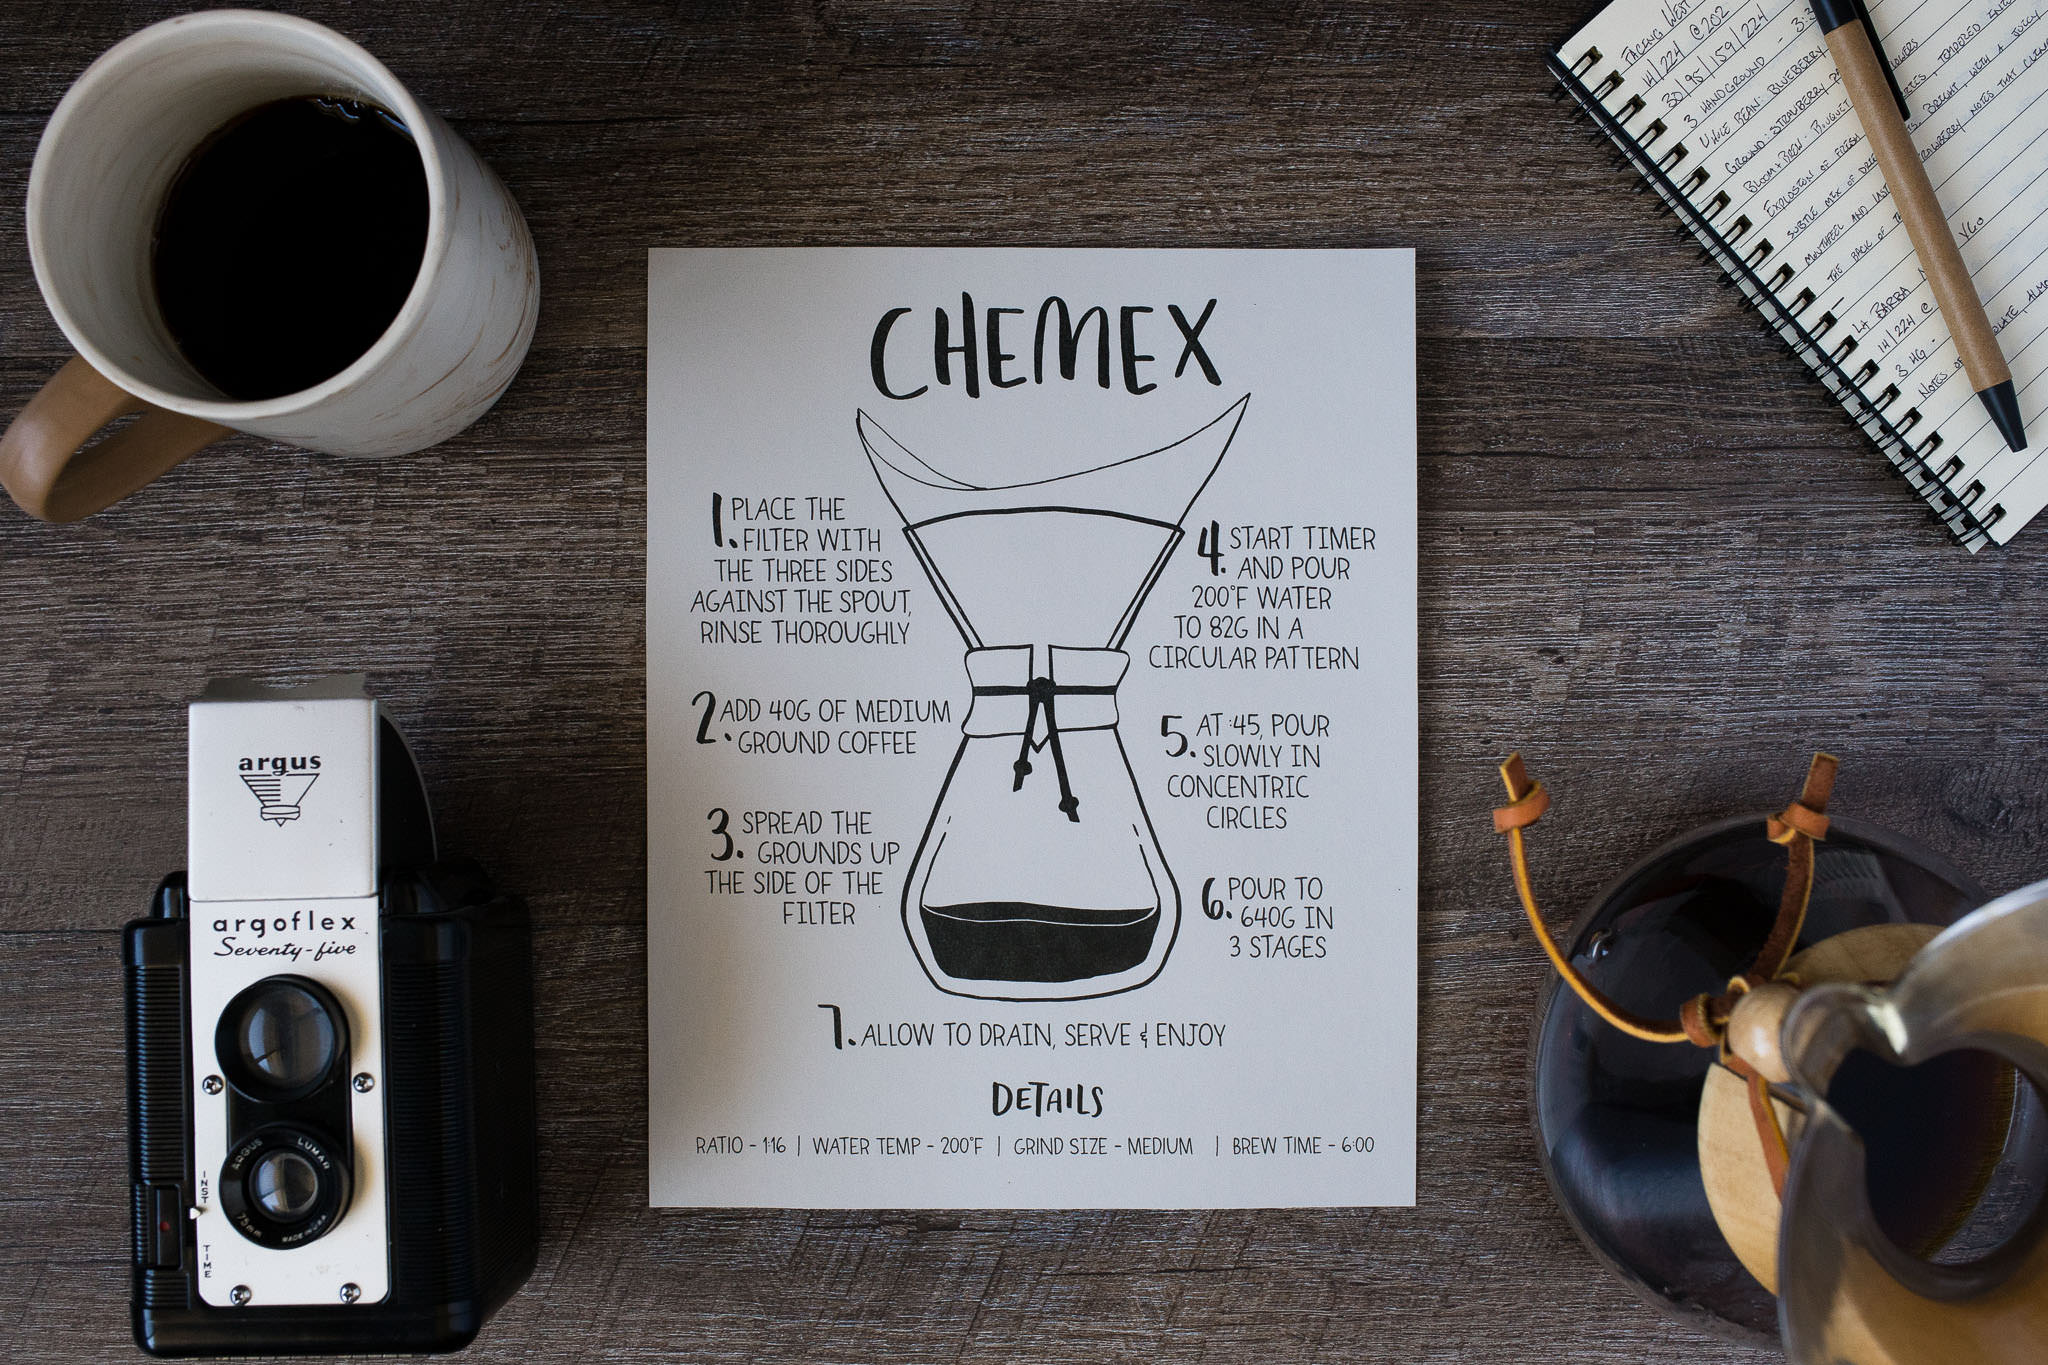 Chemex how to make coffee brew guide poster